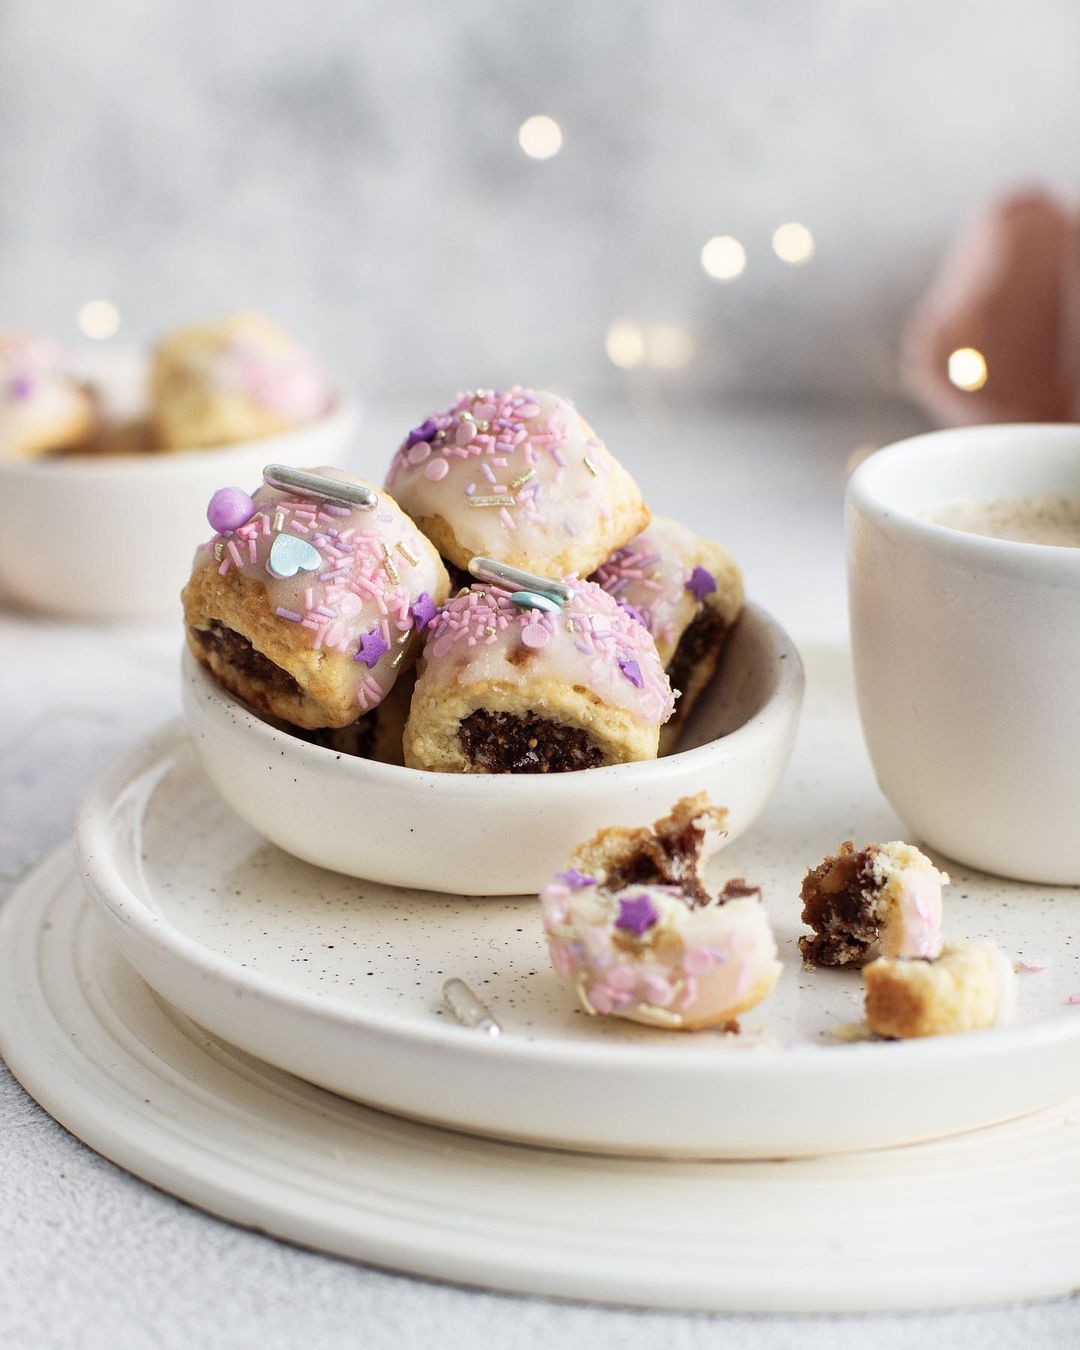 Shortbread cookies with figs, dates and nuts